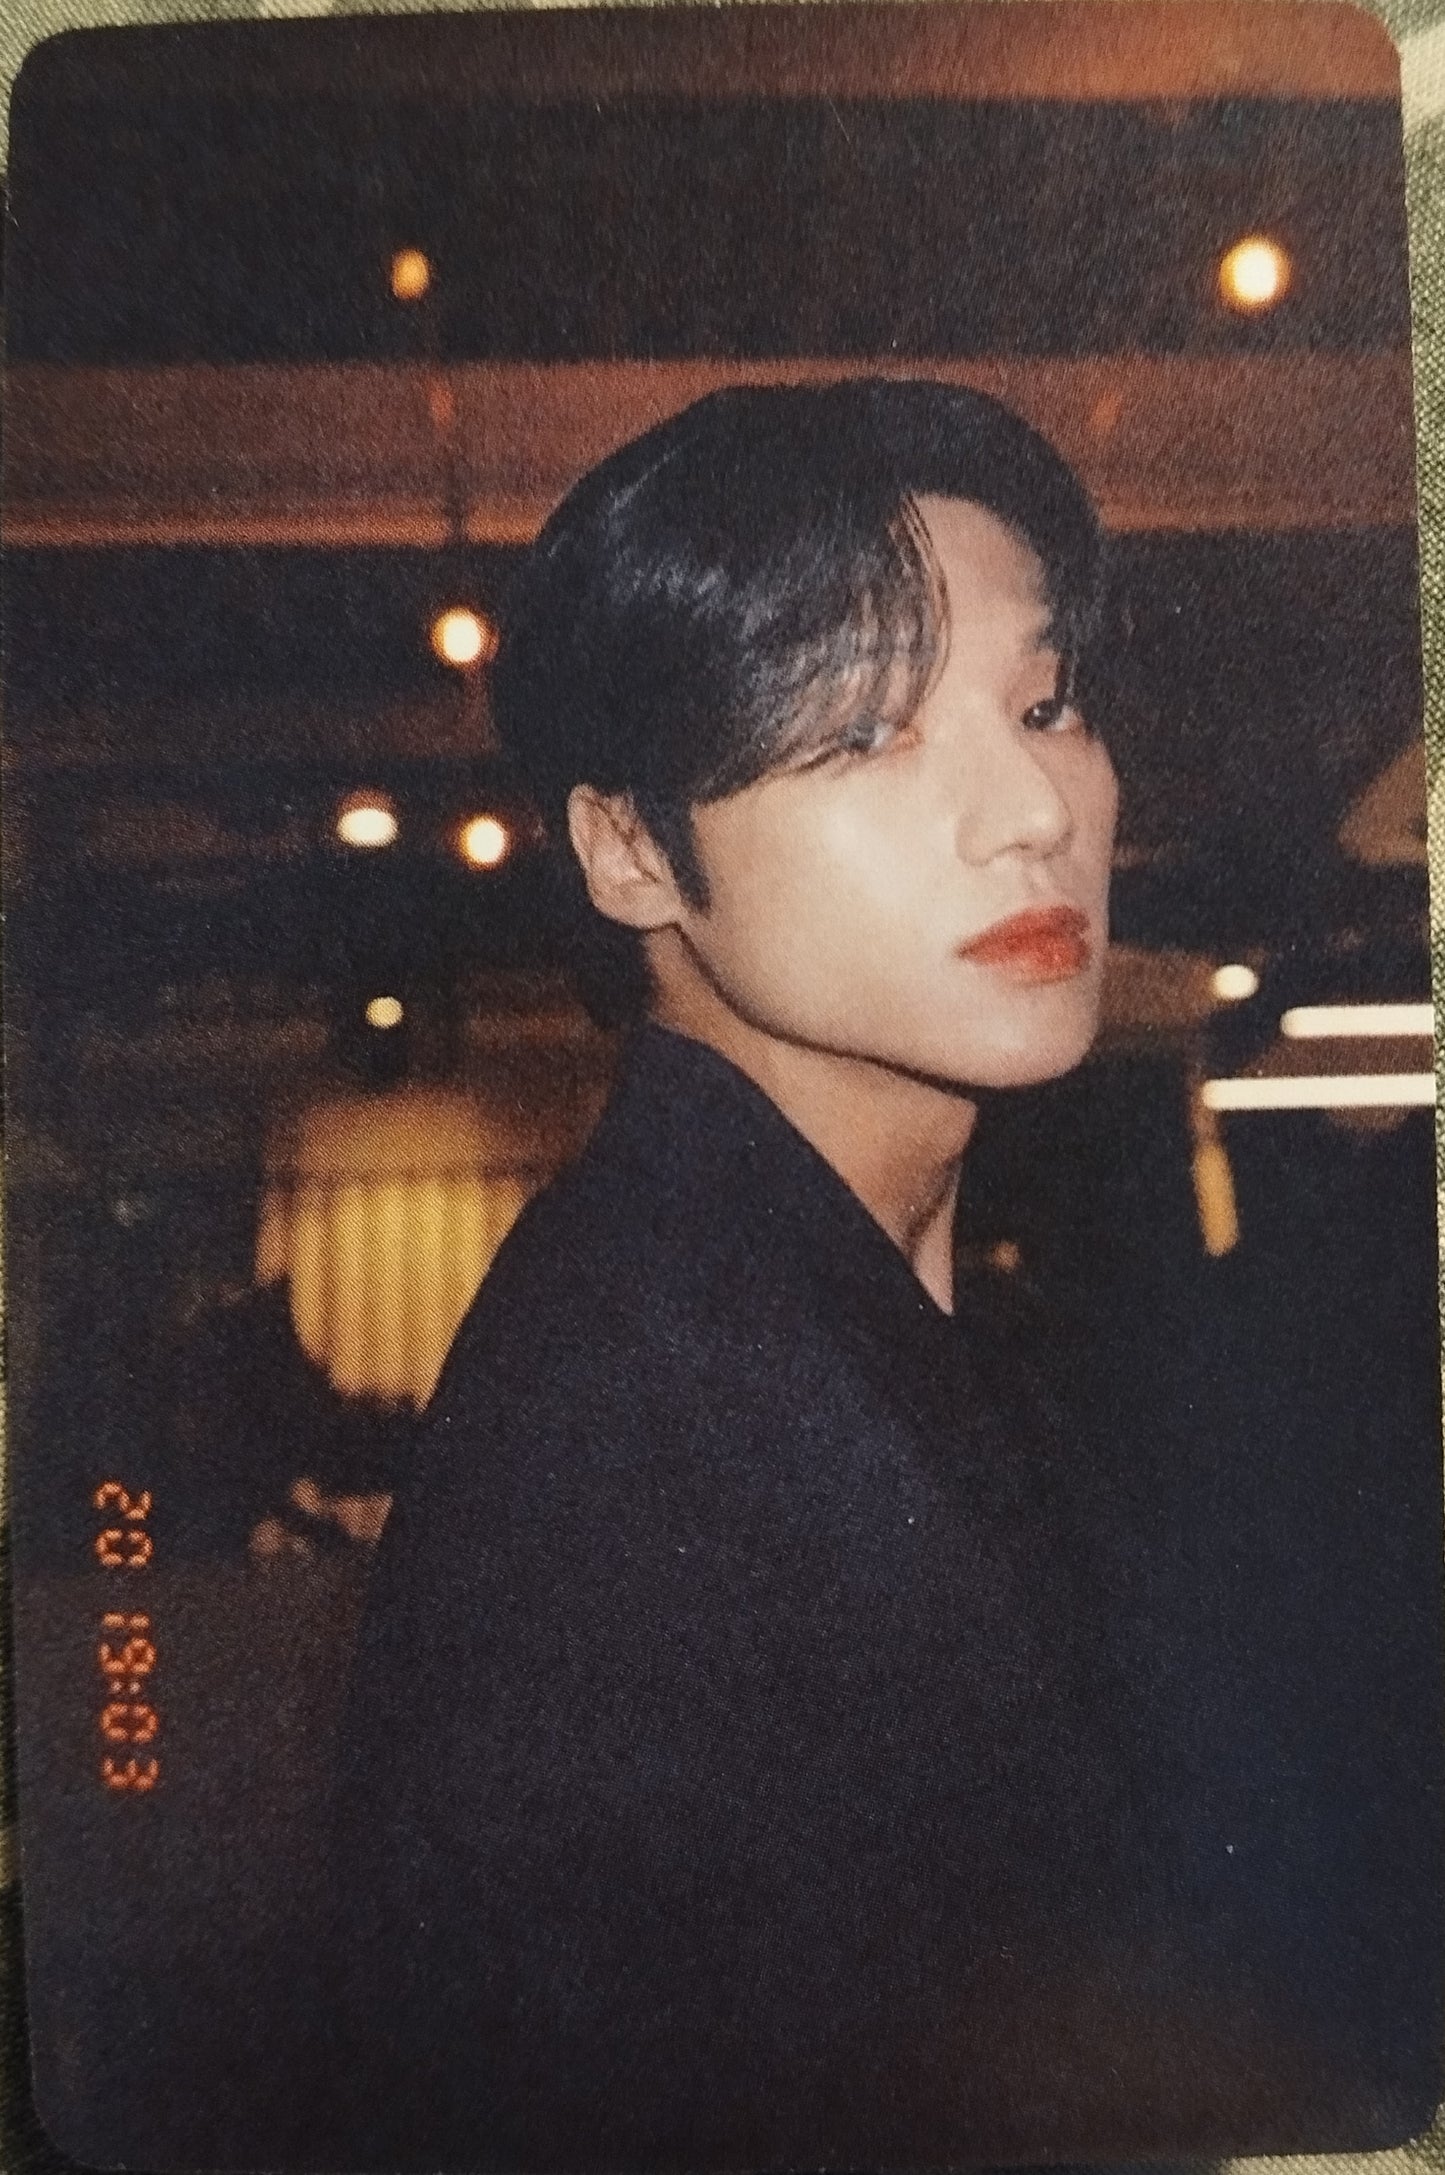 Photocard ATEEZ Limitless Wooyoung